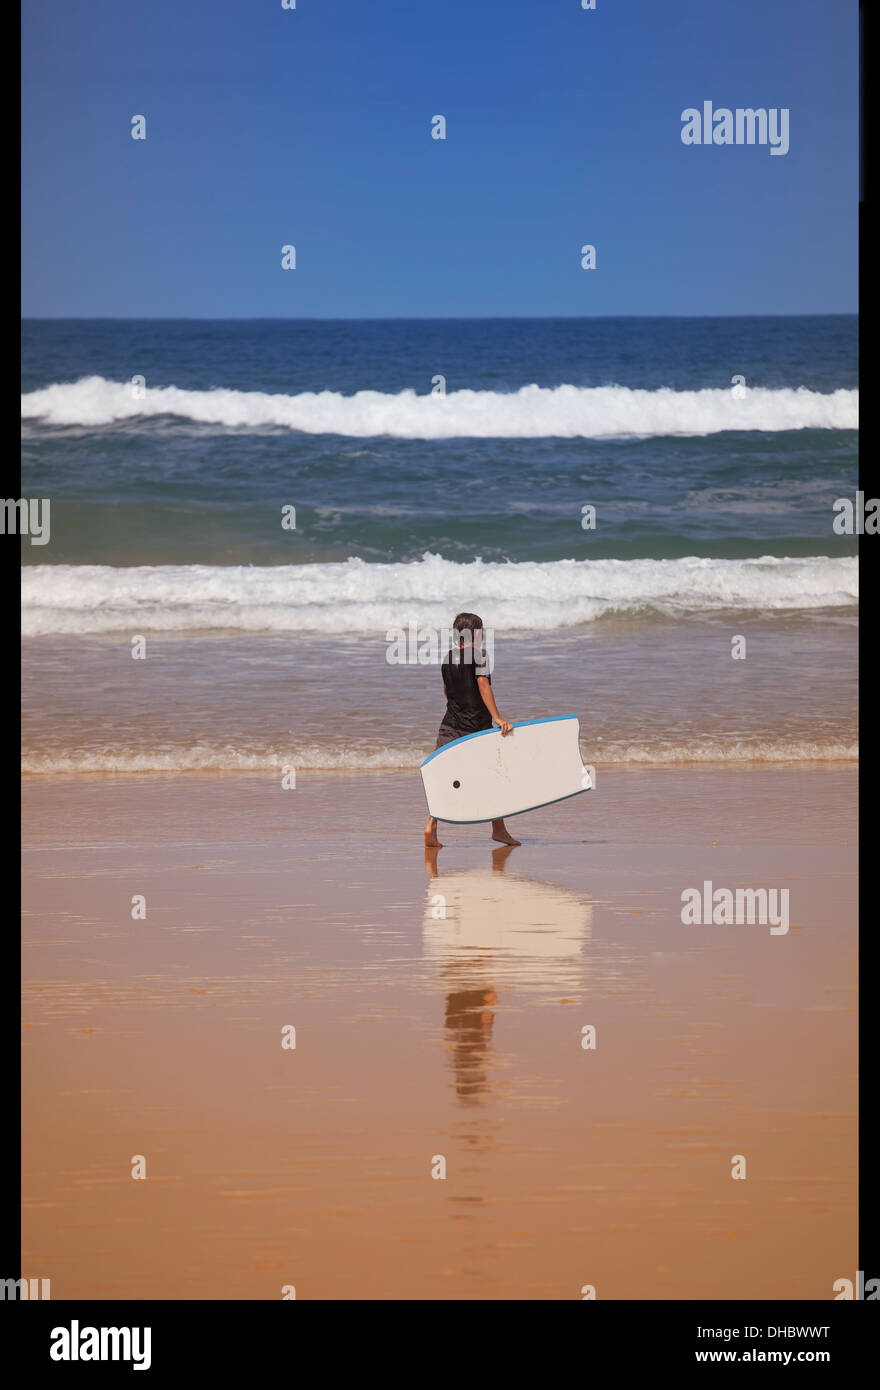 A white Australian male, teenager age 14-18, carrying a surf board on a beach in Australia. The image is in color. Stock Photo